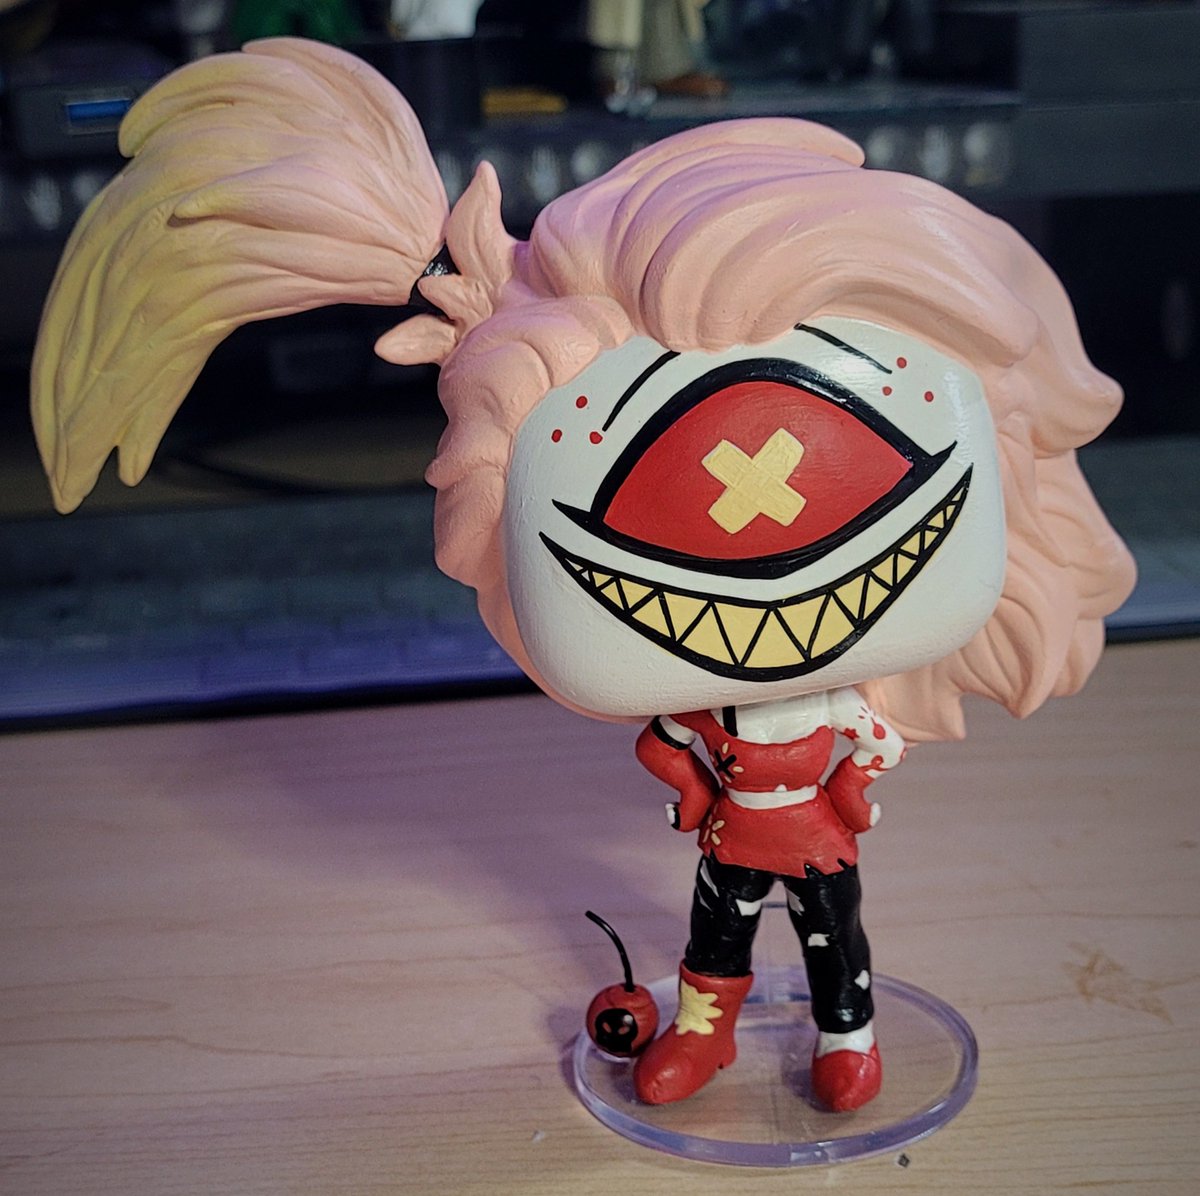 If any of y'all have wondered what I've been working on lately, the answer is too many of these guys. And I still have an #ofmd backlog, too. There are like, 30 on my desk rn, waiting. Augh. #HazbinHotel #HazbinHotelFanart #customfunkopop #wip